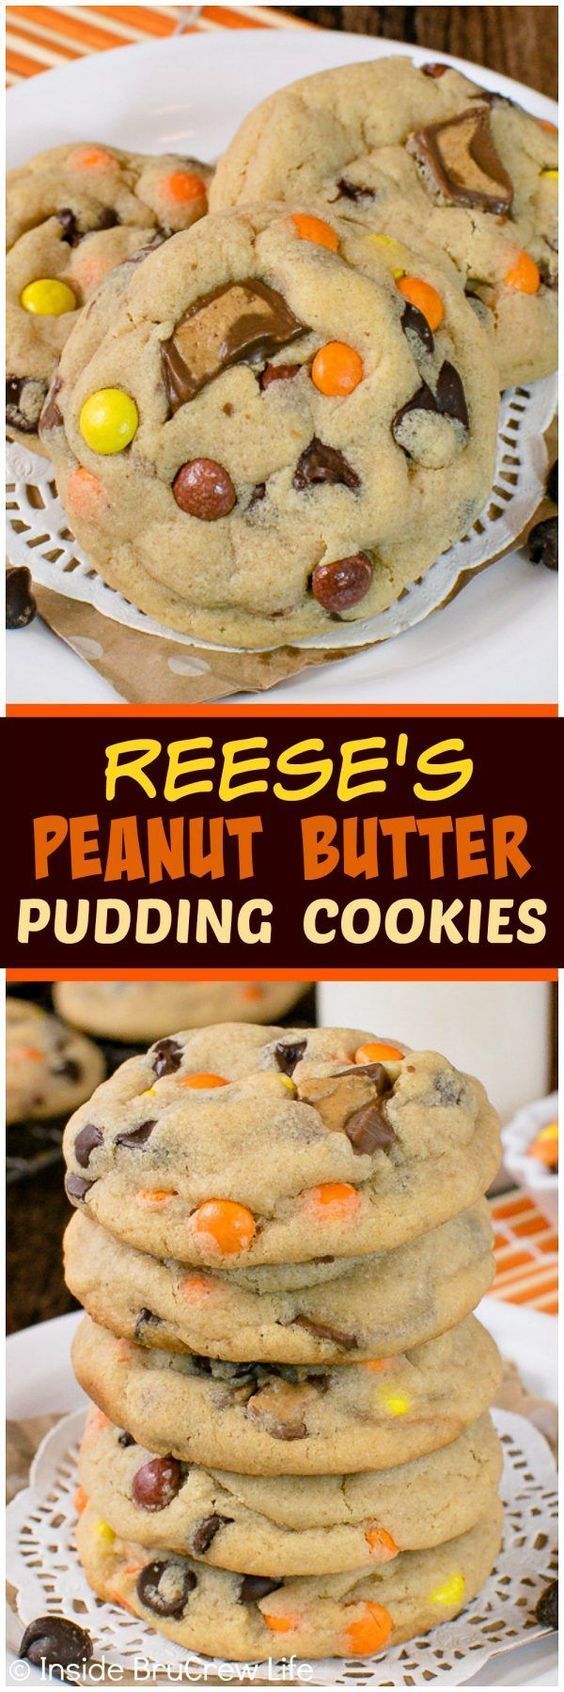 Reeses Peanut Butter Pudding Cookies – this soft and chewy cookie recipe is loaded with chocolate and candy! Great dessert to fill